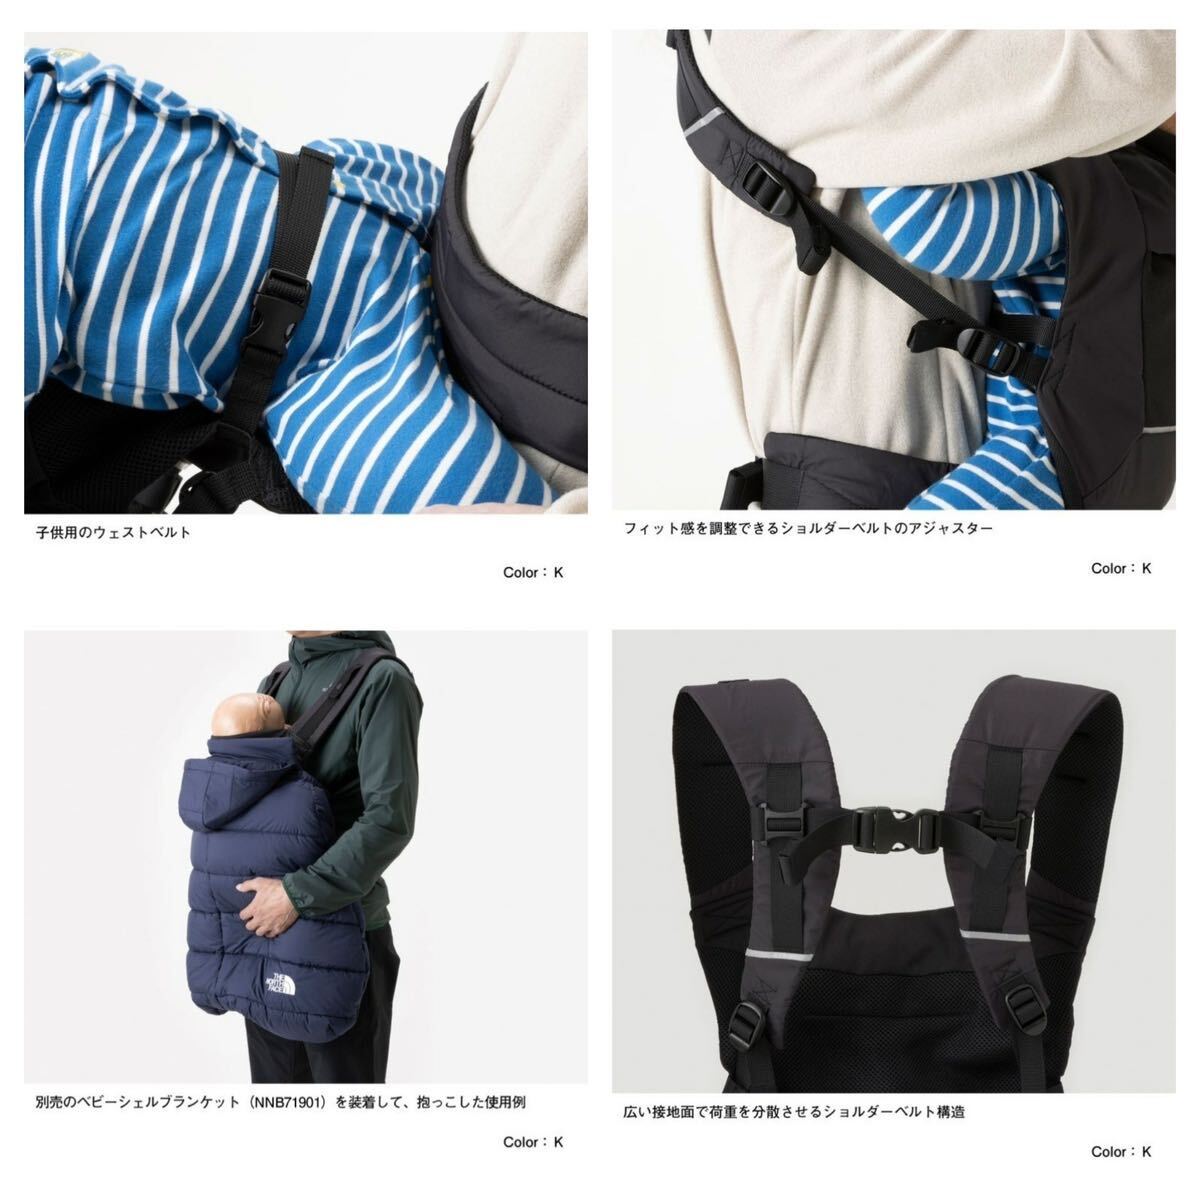 THE NORTH FACE Baby Compact Carrie NT NMB82150 ノースフェイス ベビーコンパクトキャリアー キッズ ニュートープグリーン 抱っこ紐の画像3